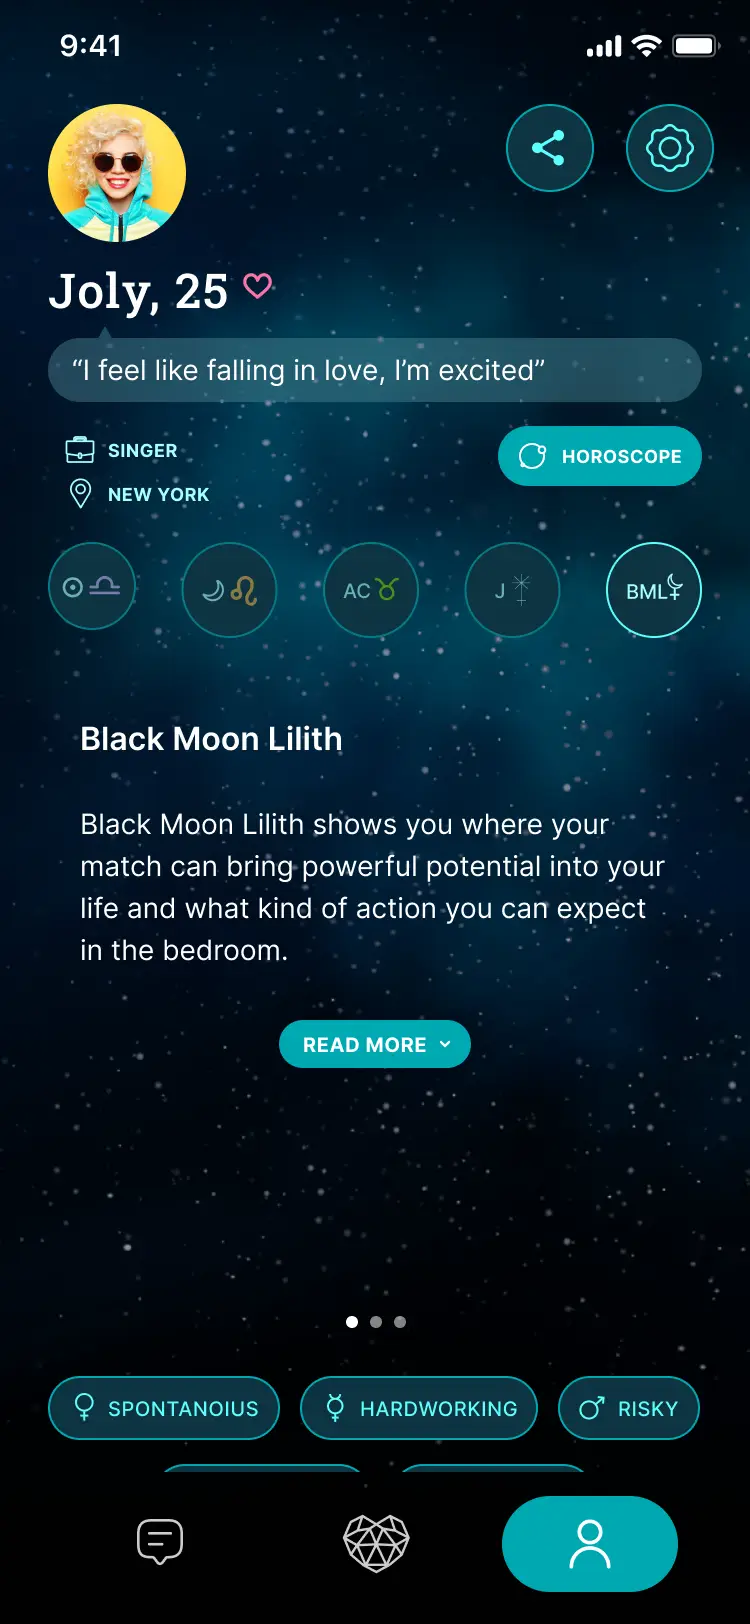 Black Moon Lilith Revealed - Premium Feature on Stars Align